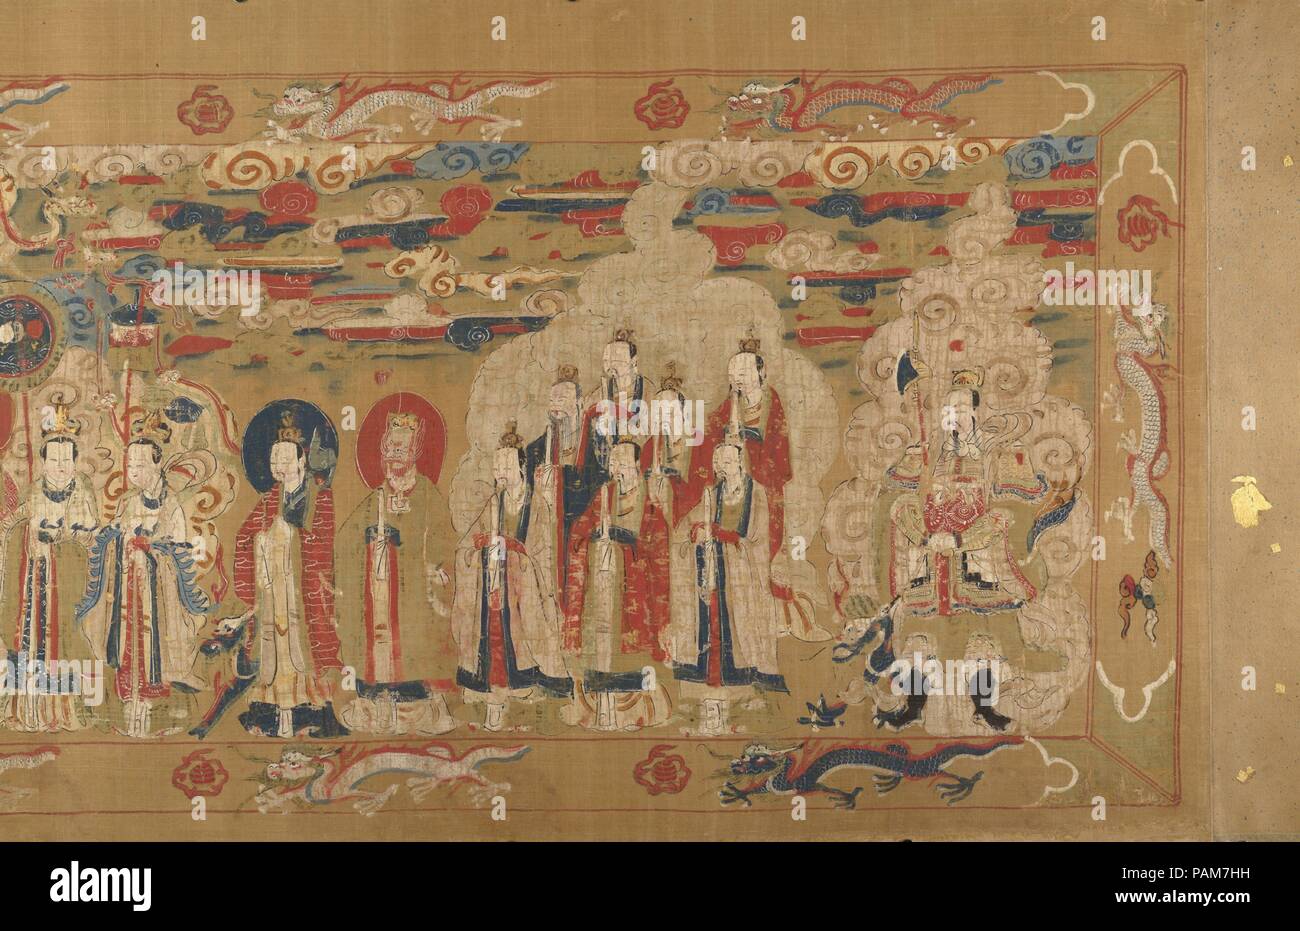 Investiture of a Daoist Deity. Artist: Unidentified Artist. Culture: China. Dimensions: Image: 19 in. × 30 ft. 3/4 in. (48.3 × 916.3 cm)  Overall with mounting: 19 in. × 34 ft. 1 in. (48.3 × 1038.9 cm). Date: inscription dated 1641.  This painting, an unsigned work of a provincial atelier, is a rare example of popular religious art. Modeled on imperial commendation scrolls, with their ornamental borders of dragons chasing flaming pearls, the scroll illustrates the investiture of a local god into the Daoist pantheon. The first half of the scroll depicts the court of the Jade Emperor, supreme de Stock Photo